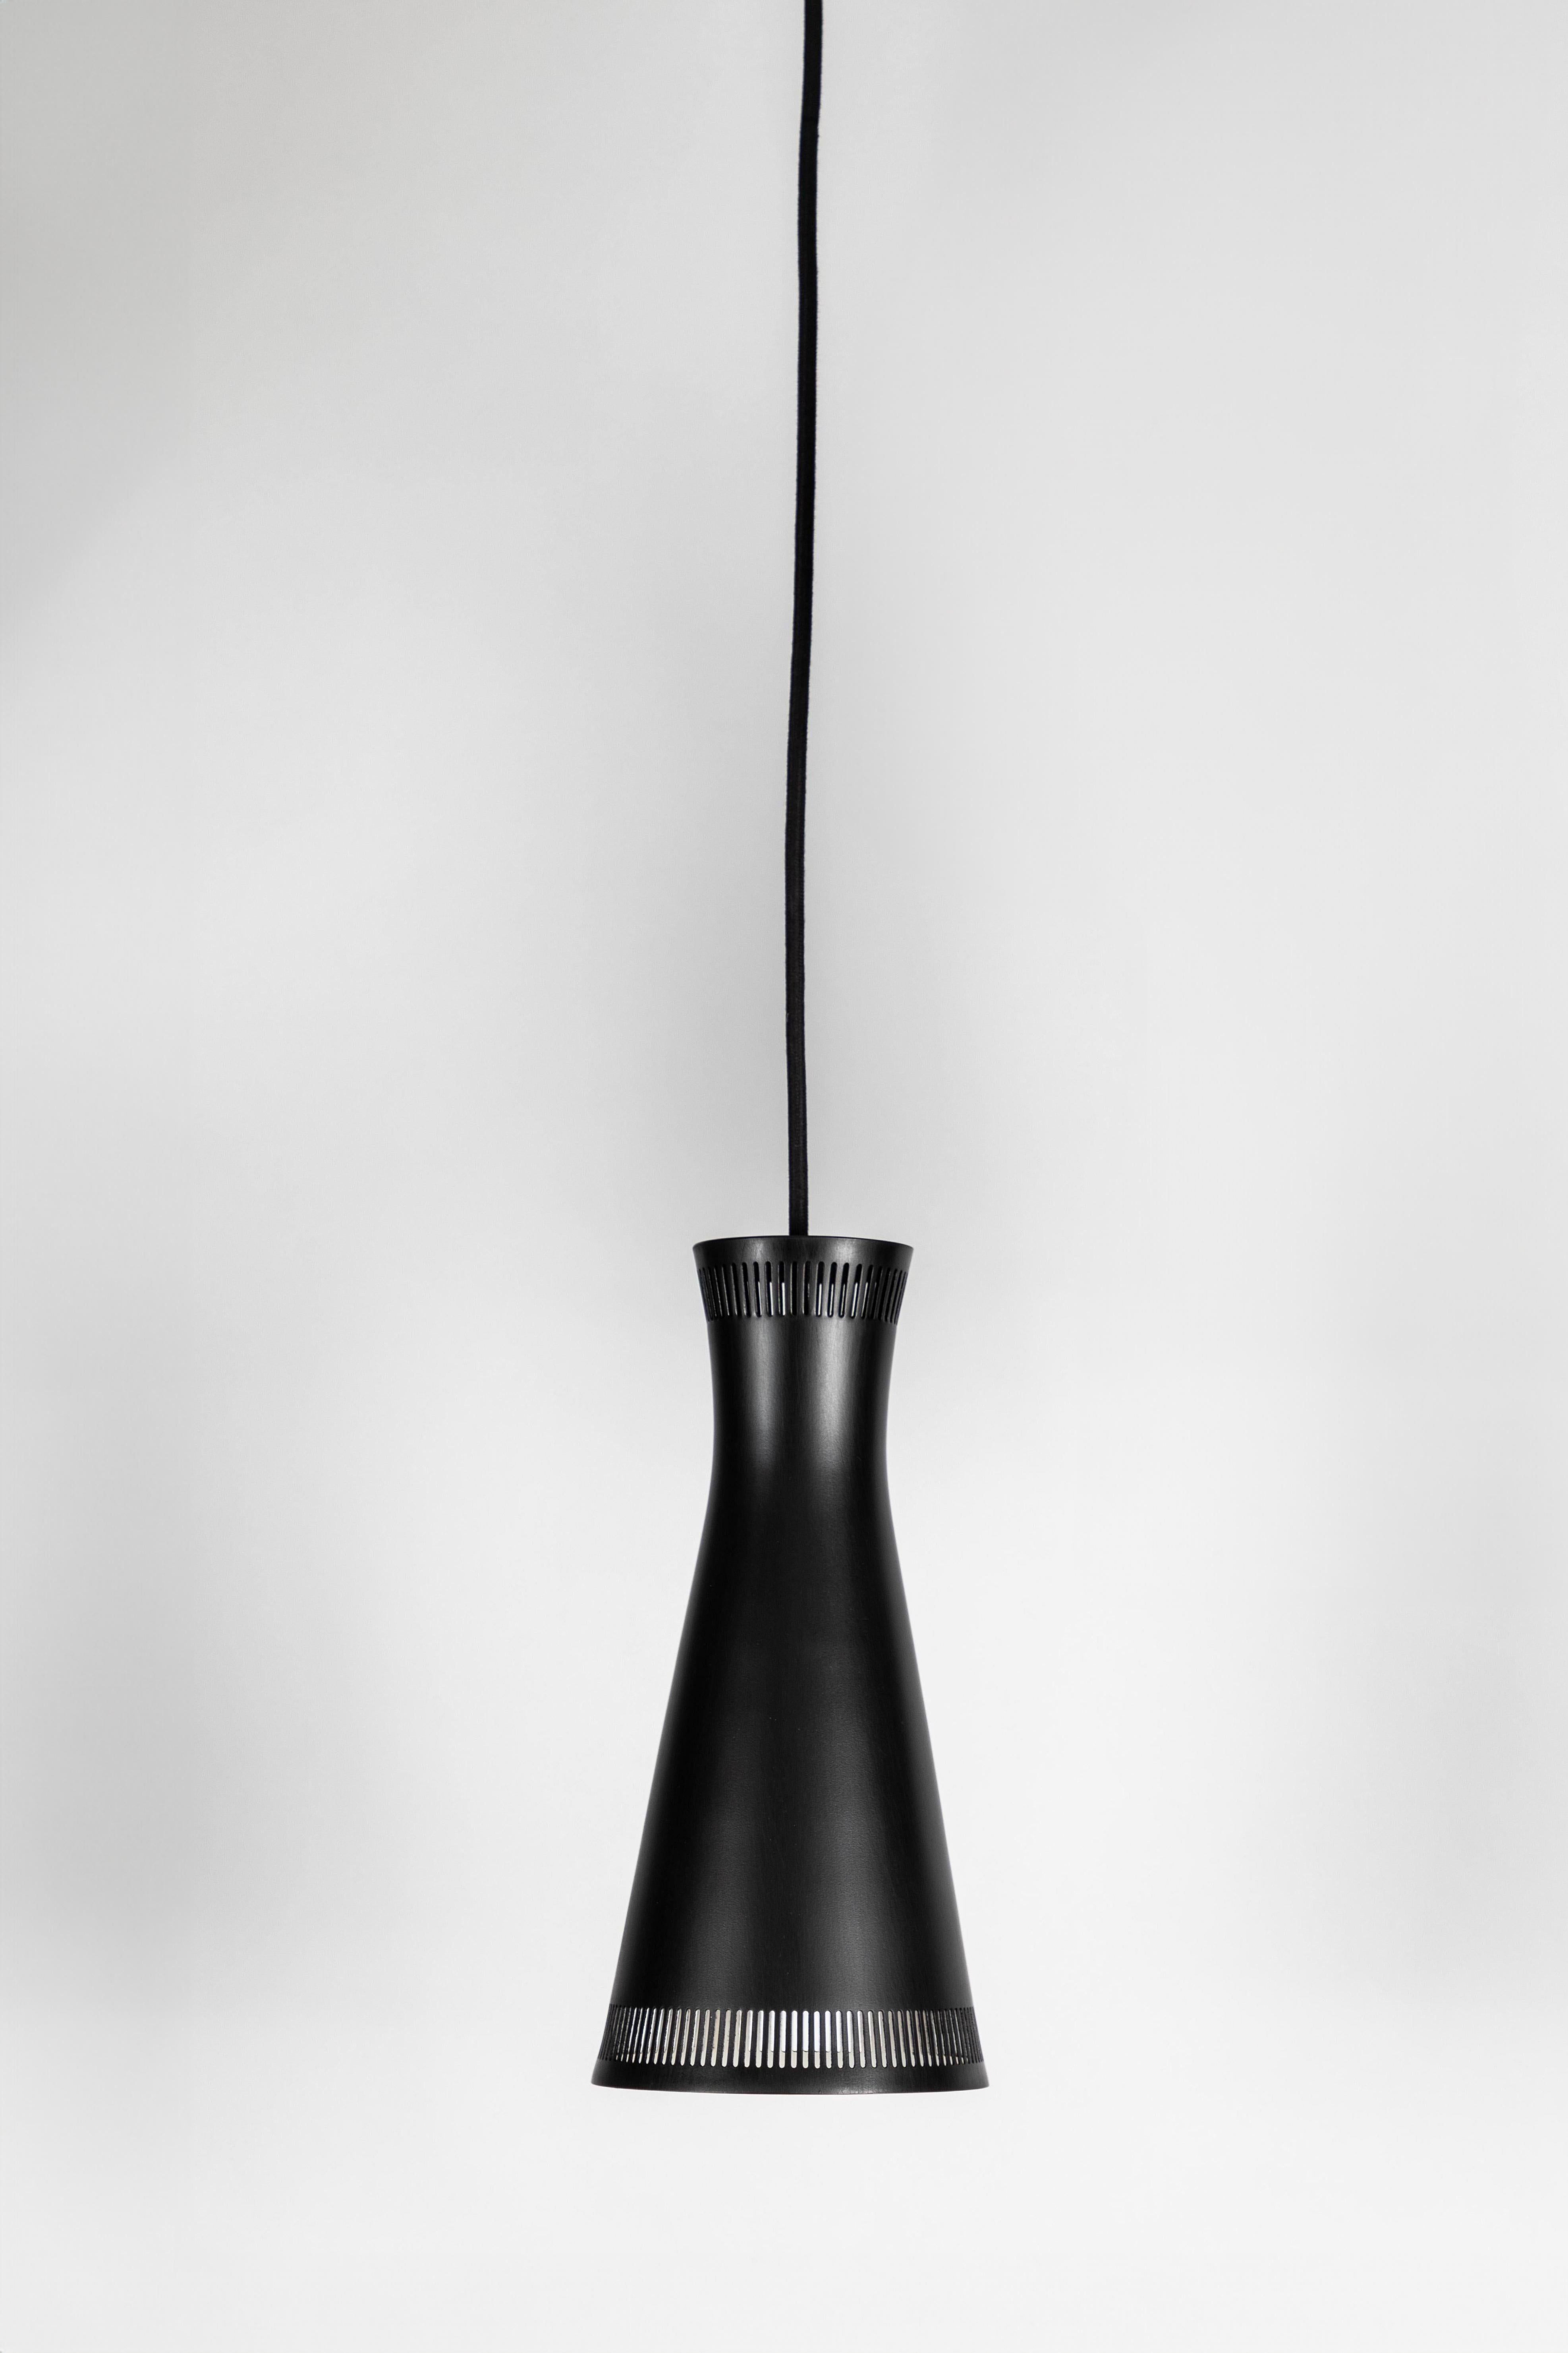 1950s Mauri Almari Perforated Black Metal Pendant for Idman Oy Finland. A rare example executed in black painted and perforated metal with period-style brass canopy for mounting over standard US j-box. Highly reminiscent of Paavo Tynell's iconic